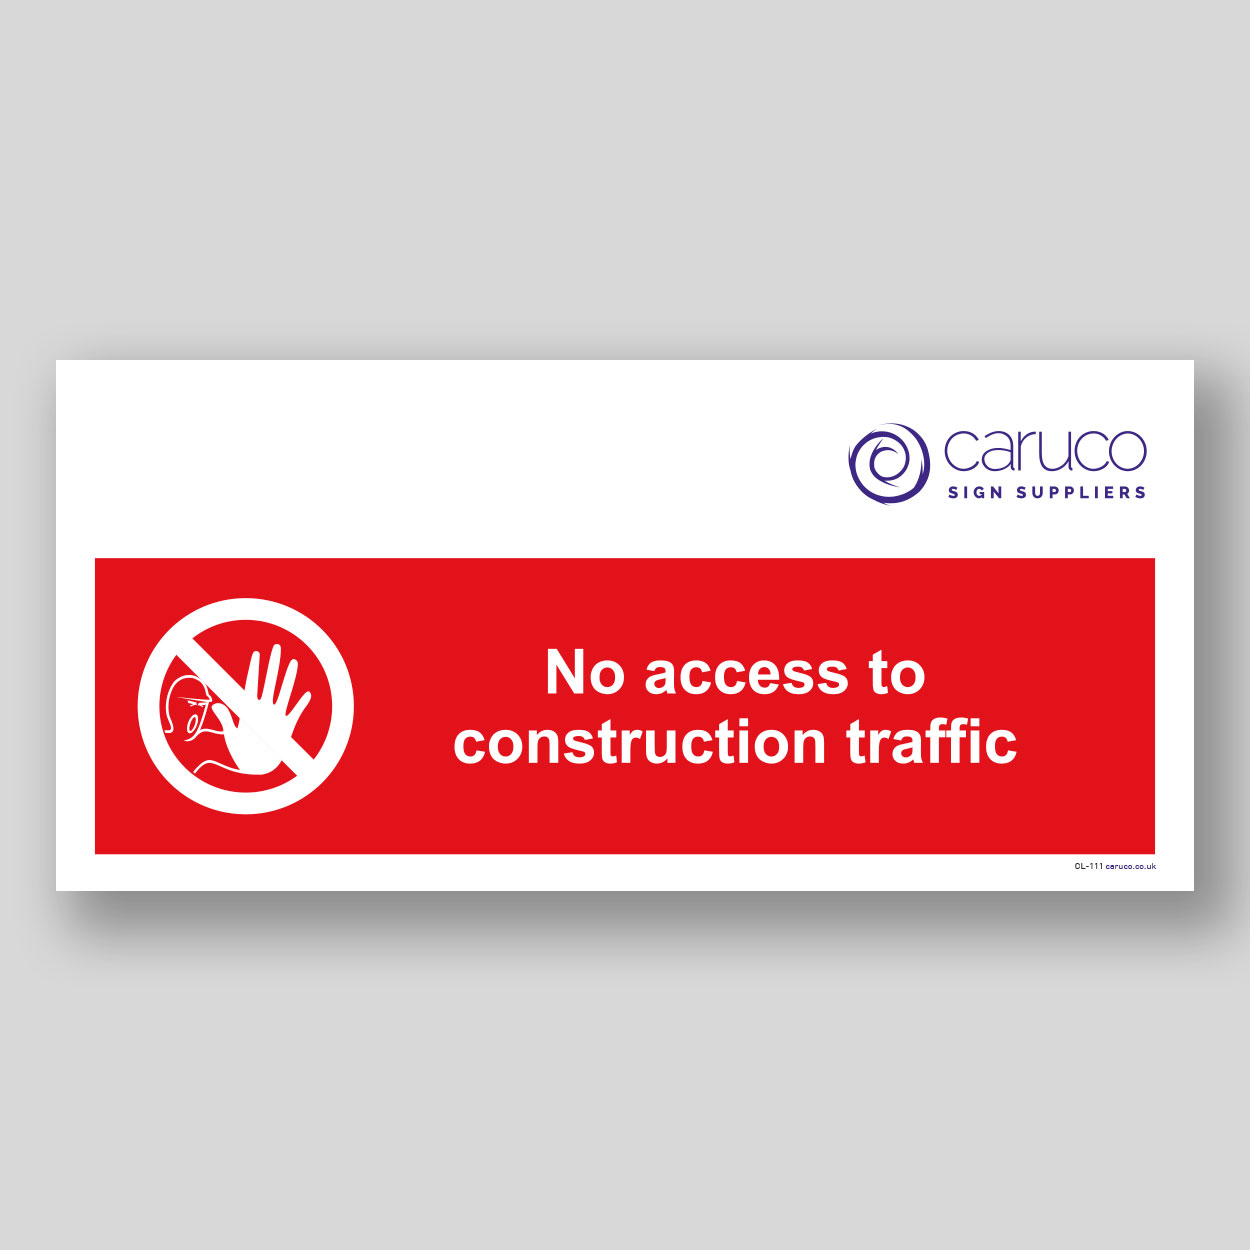 CL-111 No access to construction traffic